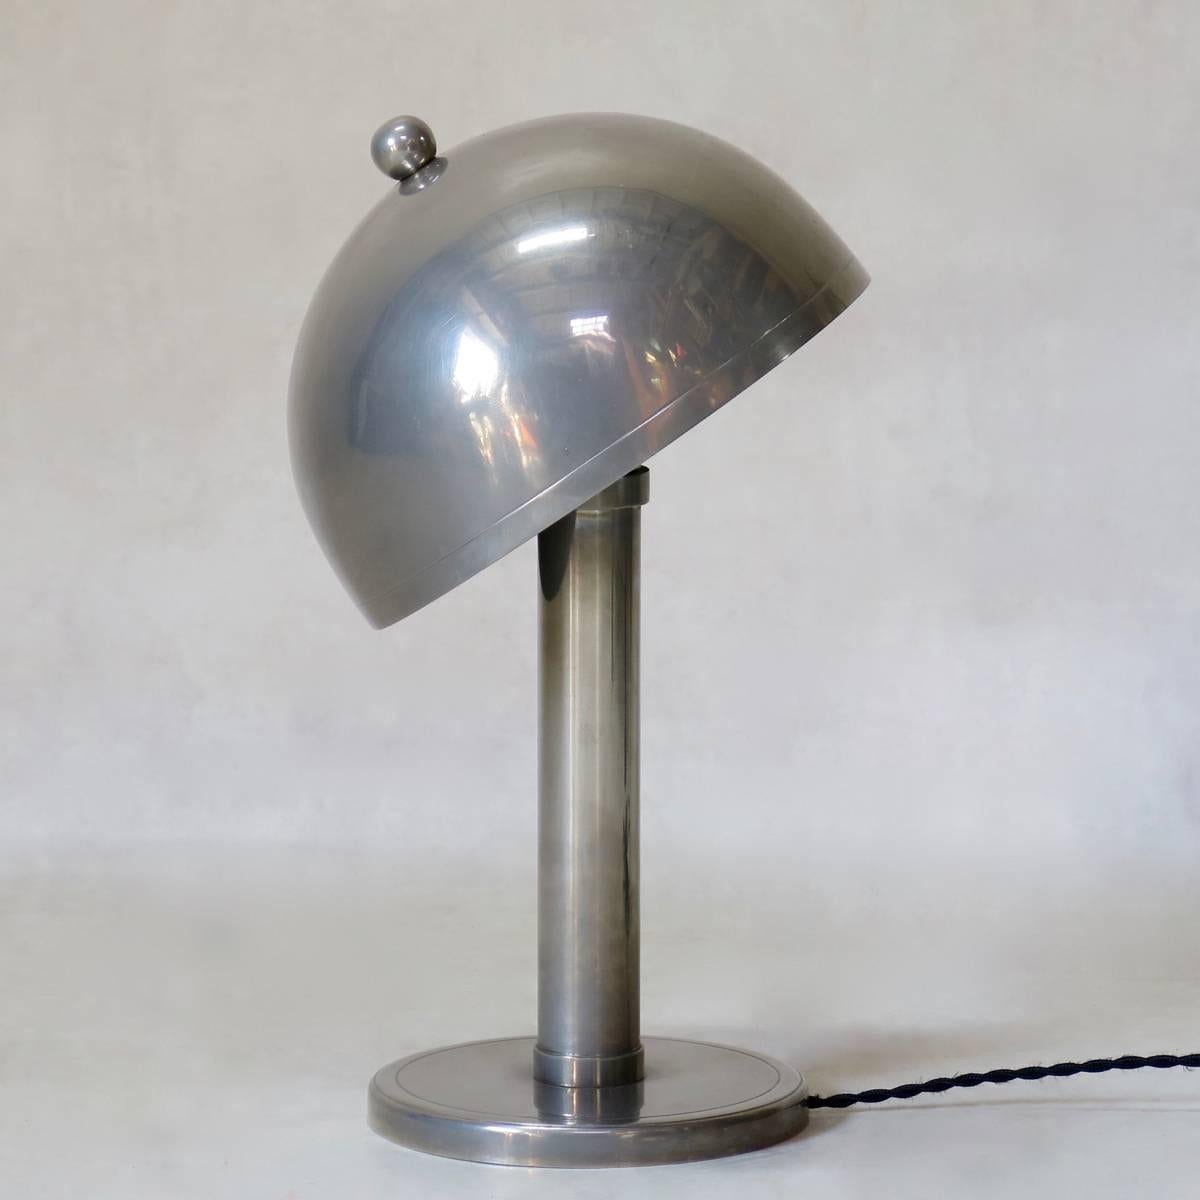 Lovely quality desk lamp of pleasant, Minimalist design, with a domed shade which can be oriented to direct the light. Very agreable nickeled finish -- softer, warmer looking than chrome, and of superior quality.